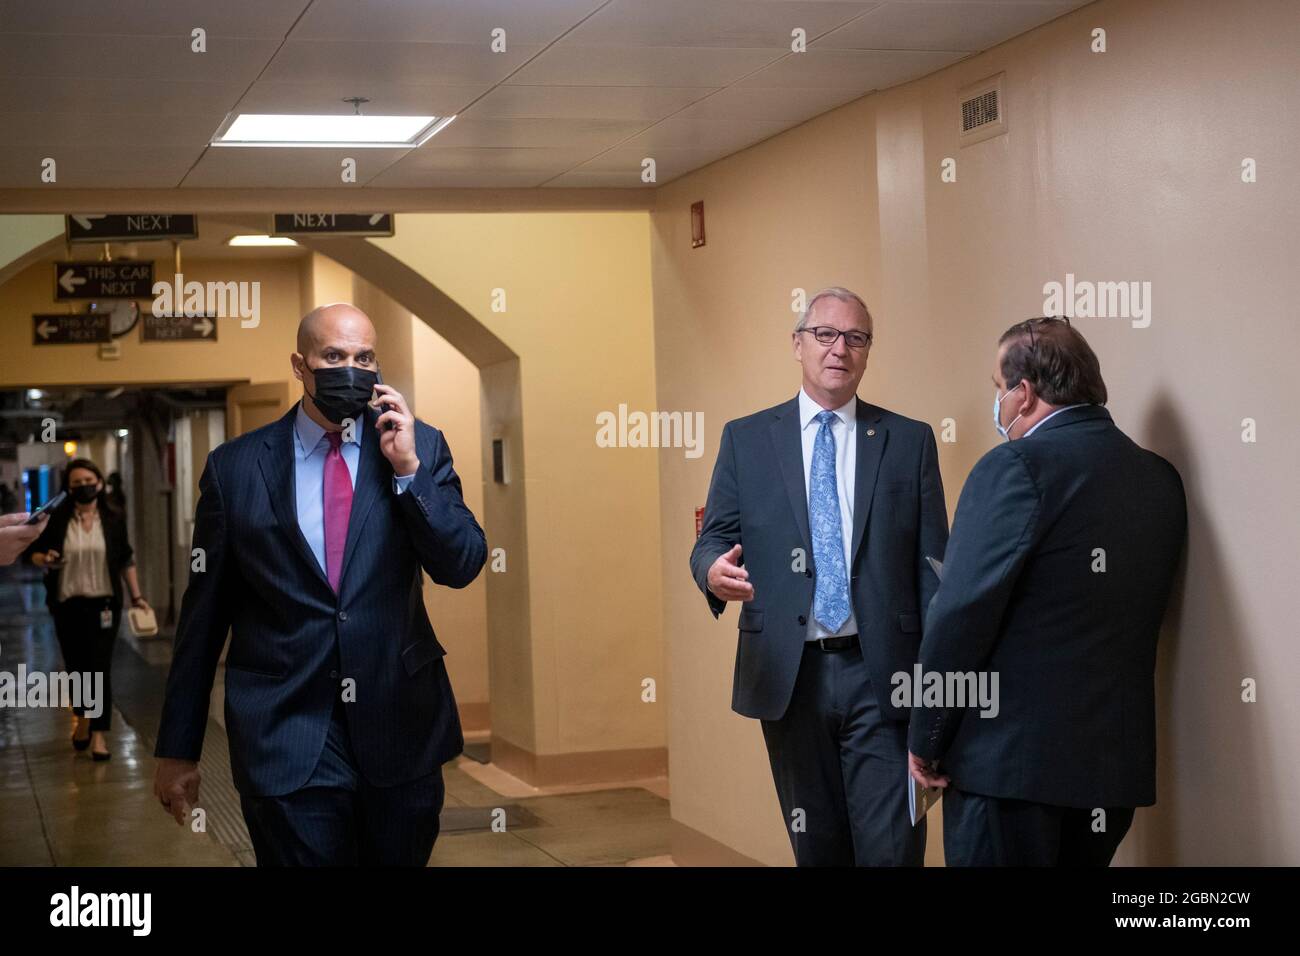 Washington, Vereinigte Staaten. 04th Aug, 2021. United States Senator Cory Booker (Democrat of New Jersey), left, walks past while United States Senator Kevin Cramer (Republican of North Dakota) talks with a reporter in the Senate subway during a vote on amendments to H.R. 3684, the Infrastructure Investment and Jobs Act, at the US Capitol in Washington, DC, Wednesday, August 4, 2021. Credit: Rod Lamkey/CNP/dpa/Alamy Live News Stock Photo